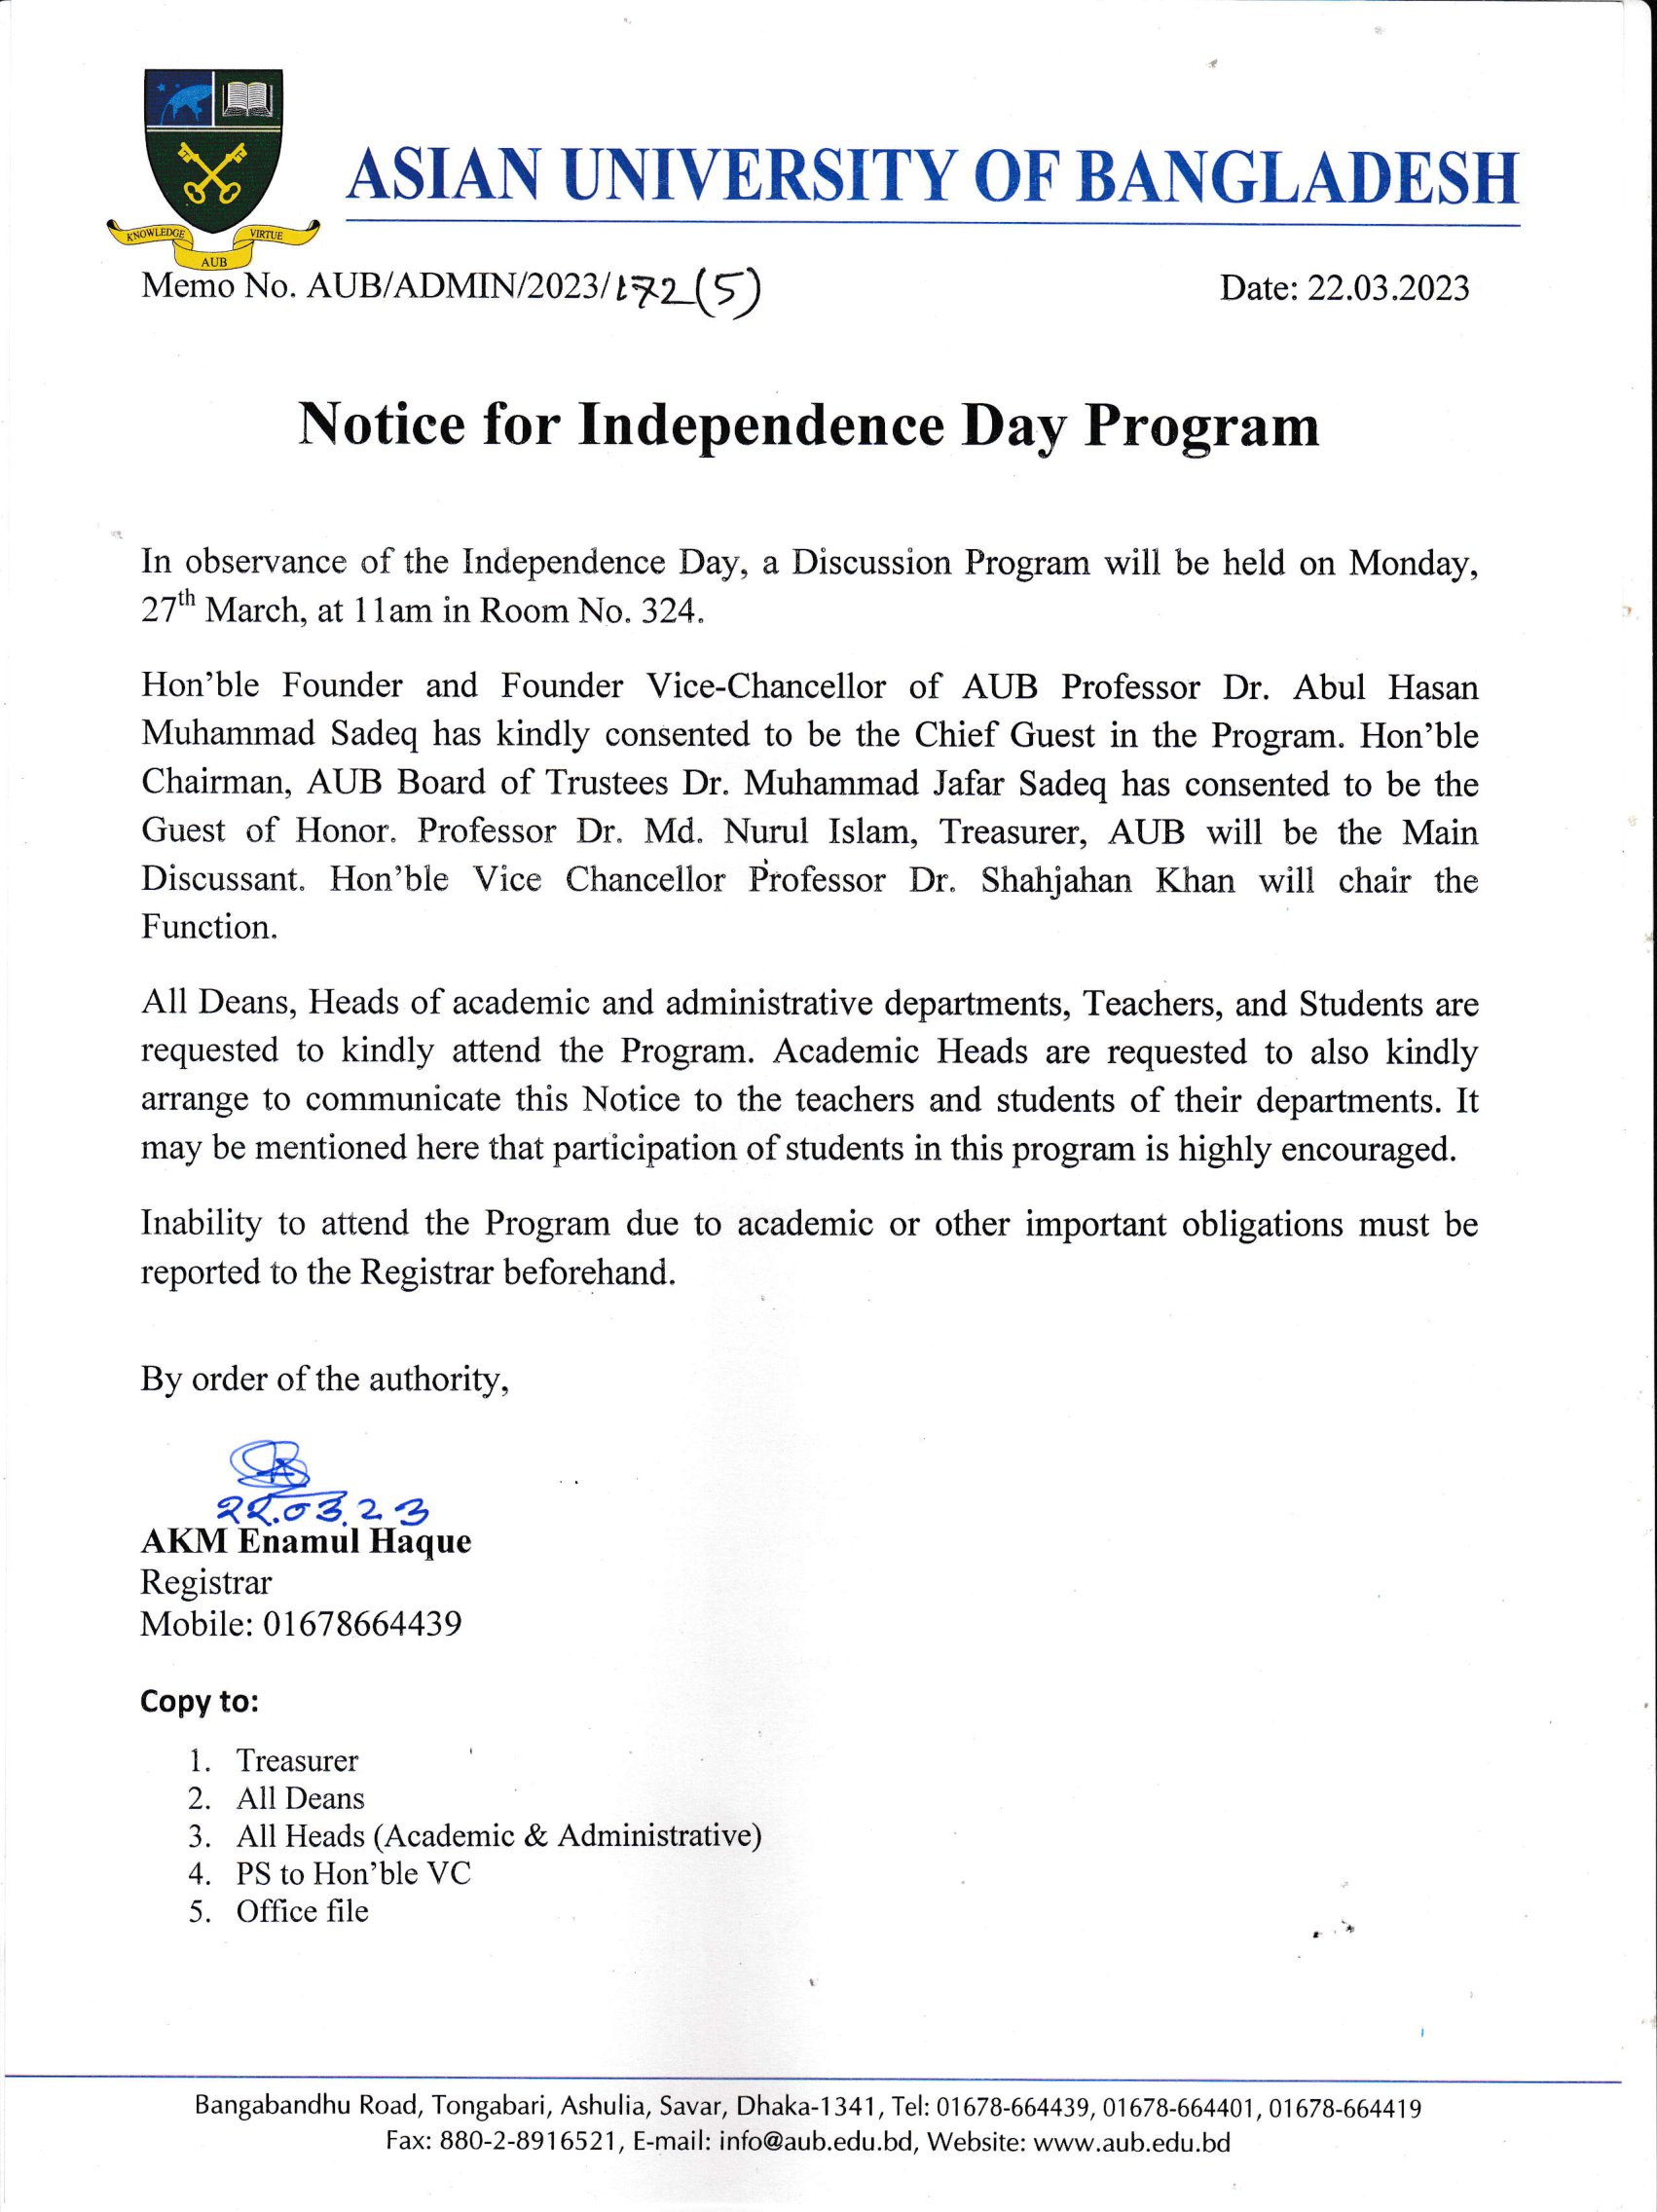 Notice for Independence Day Program in AUB